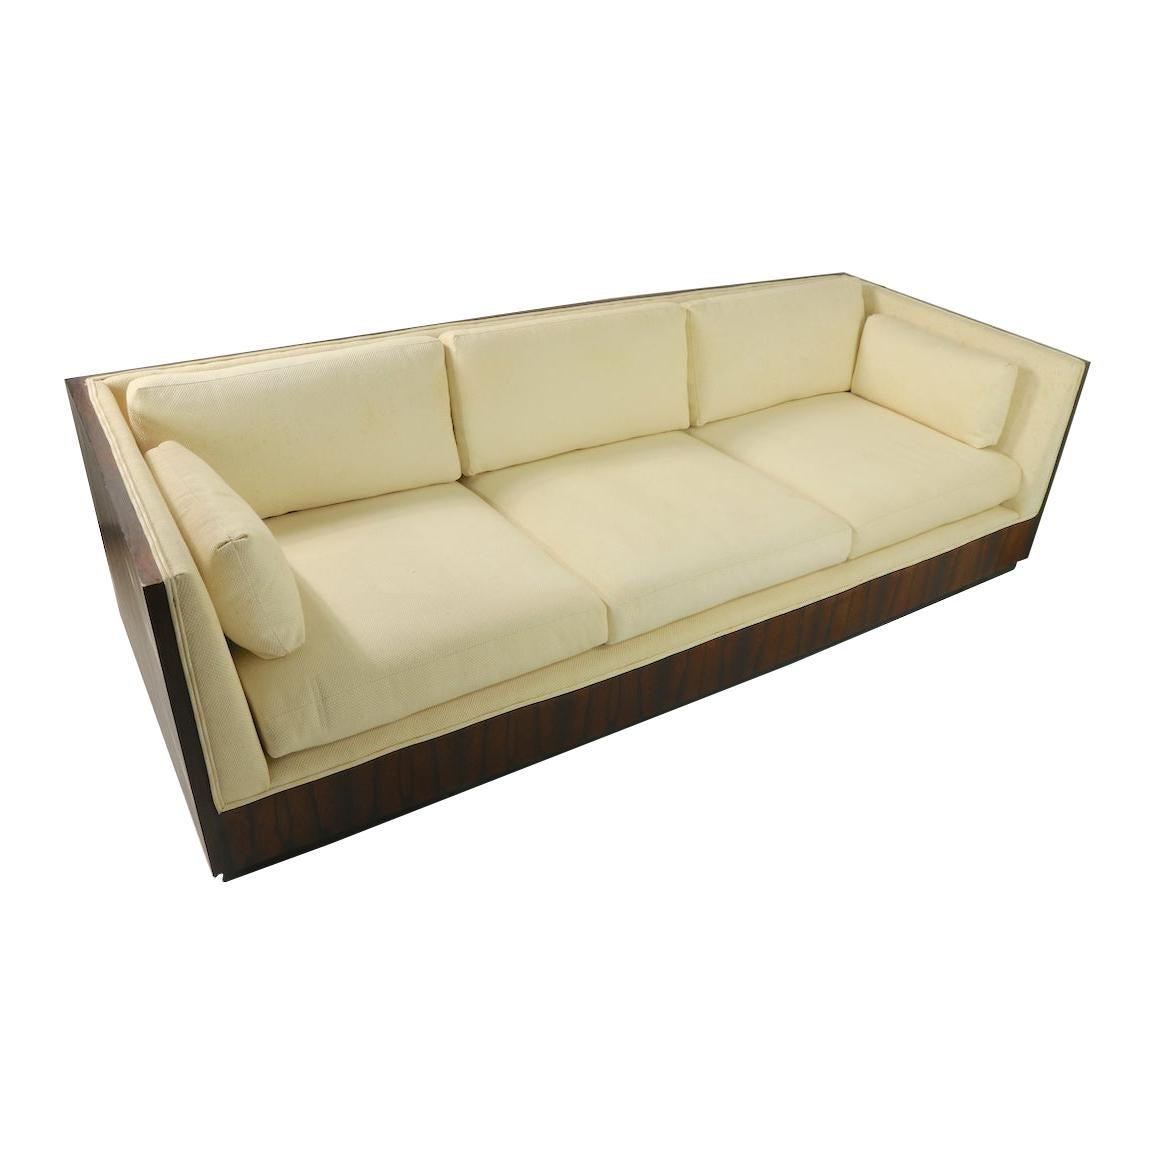 Rosewood Box Sofa by Baughman for Thayer Coggin